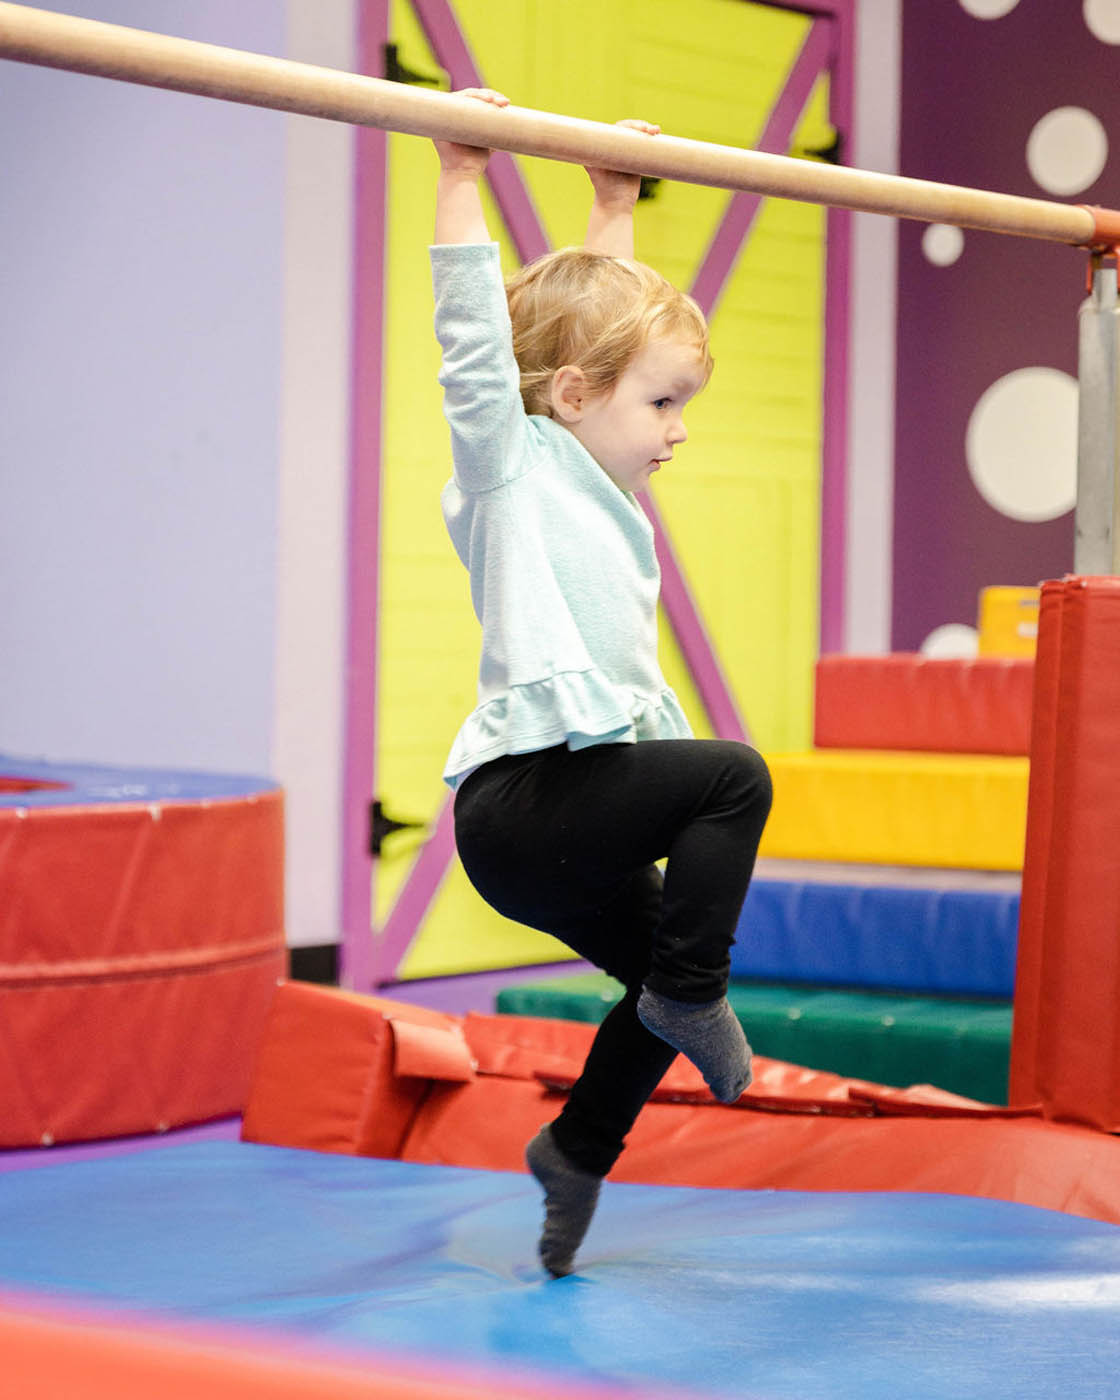 A kid swining from Romp n' Roll gym equipment - safe kids fitness classes in Pittsburgh, PA.